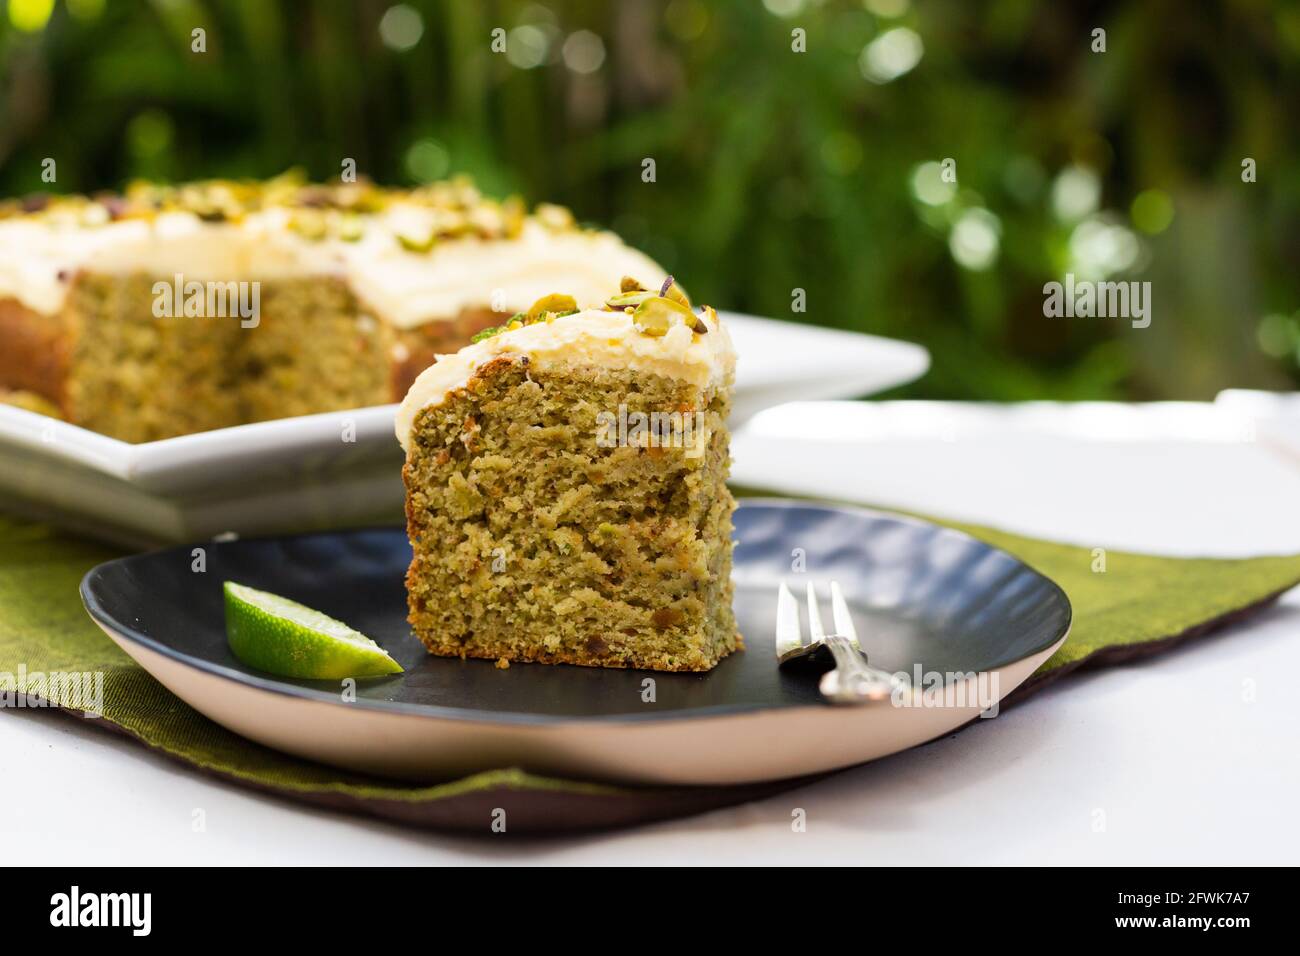 Lime and pastachio cake in garden setting with a slice of cake and lime in foreground Stock Photo